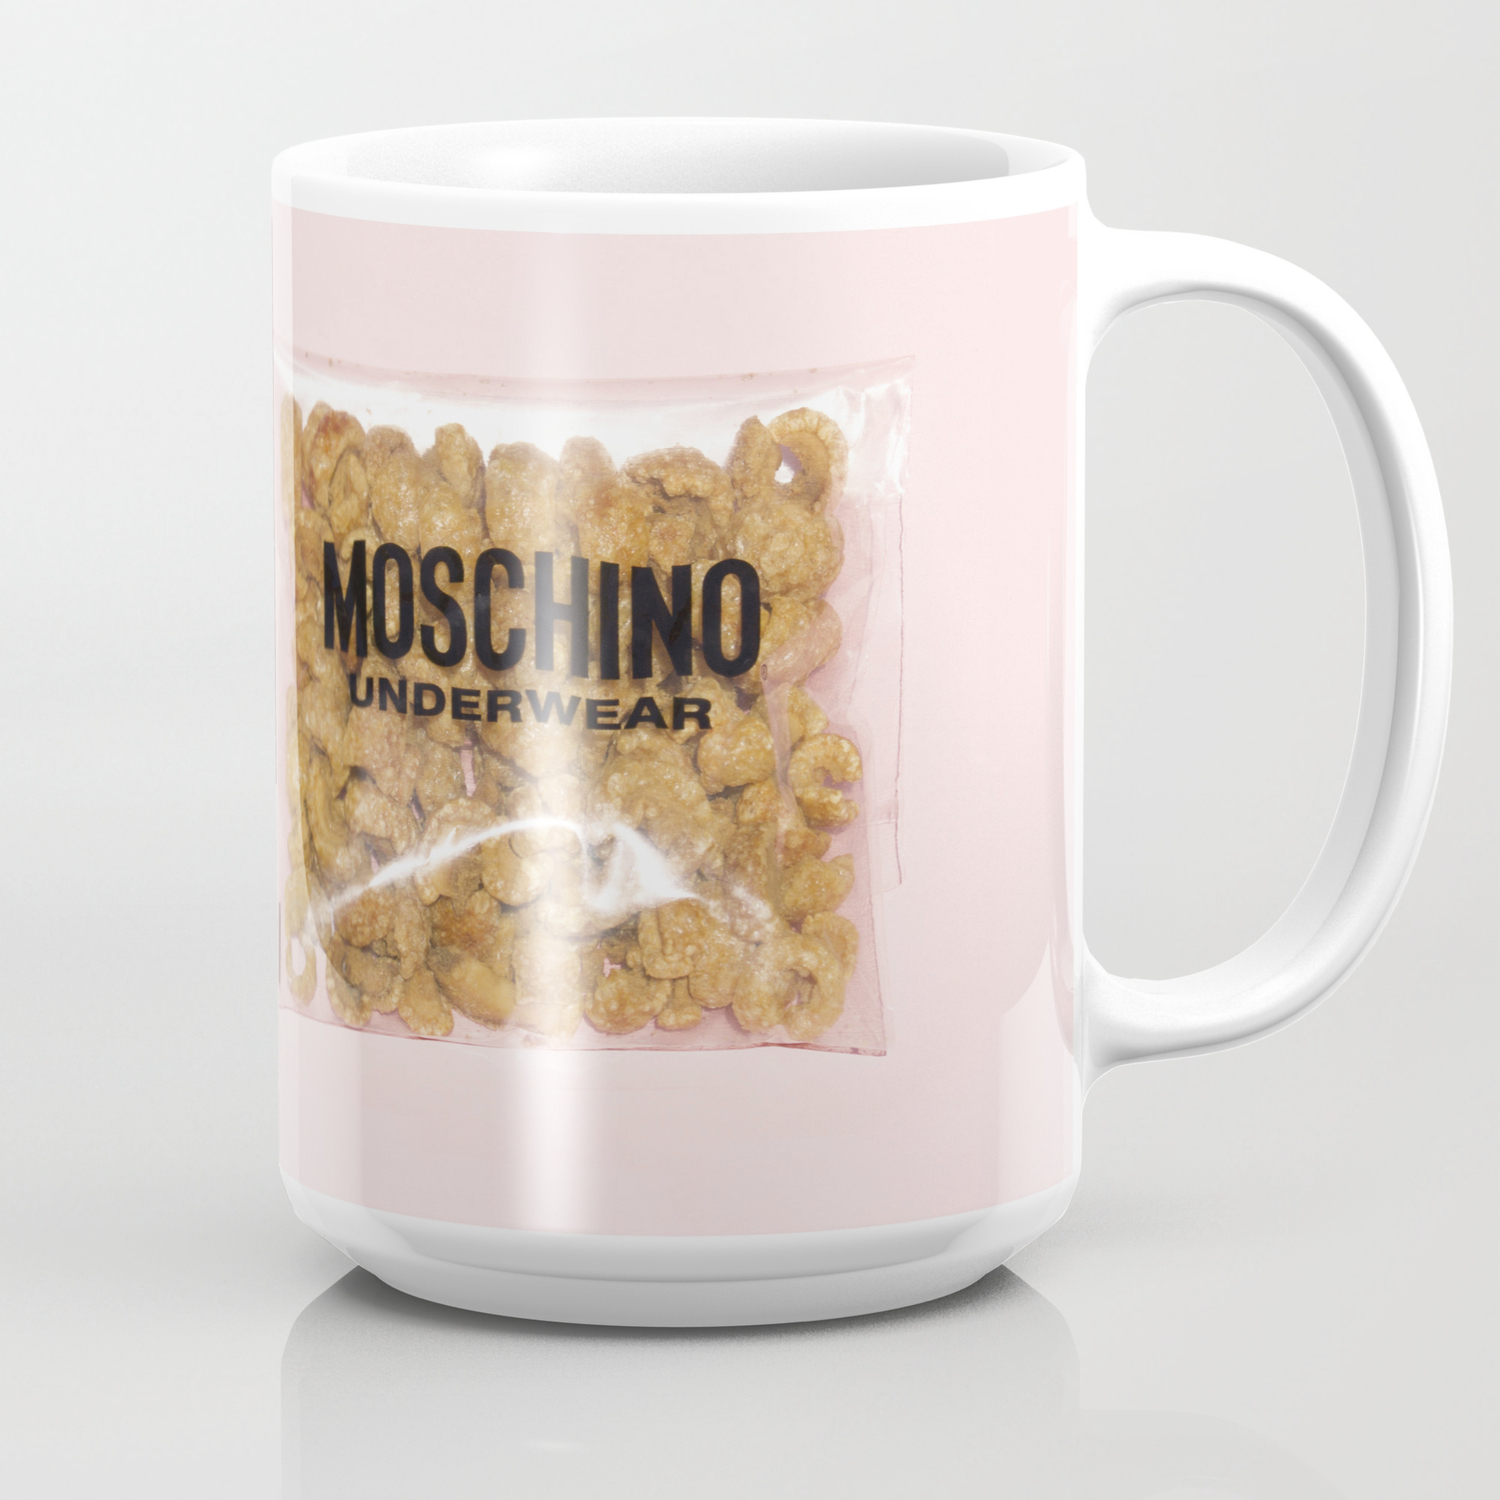 moschino cup